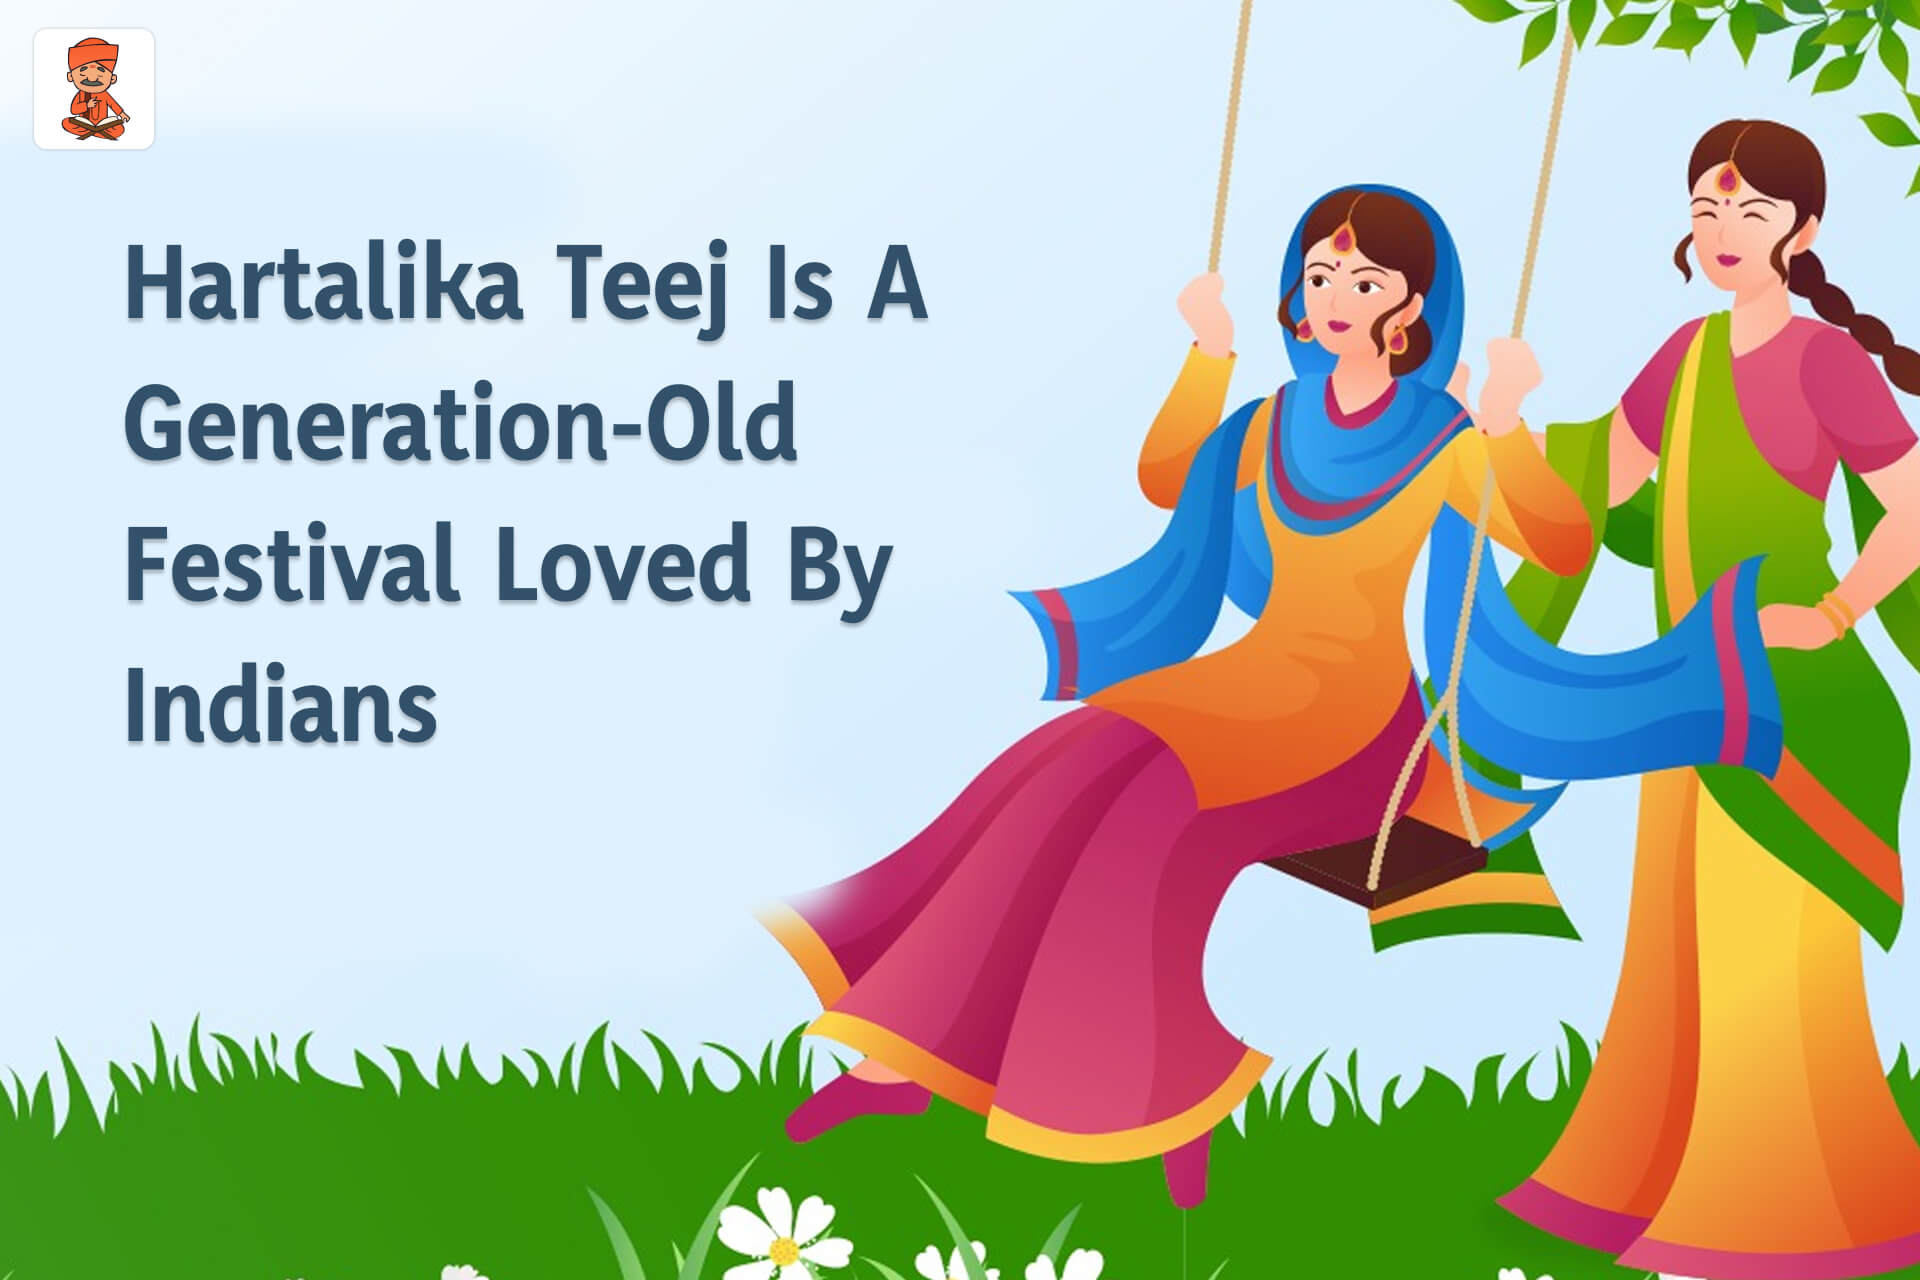 Hartalika Teej Is A Generation-Old Festival Loved By Indians